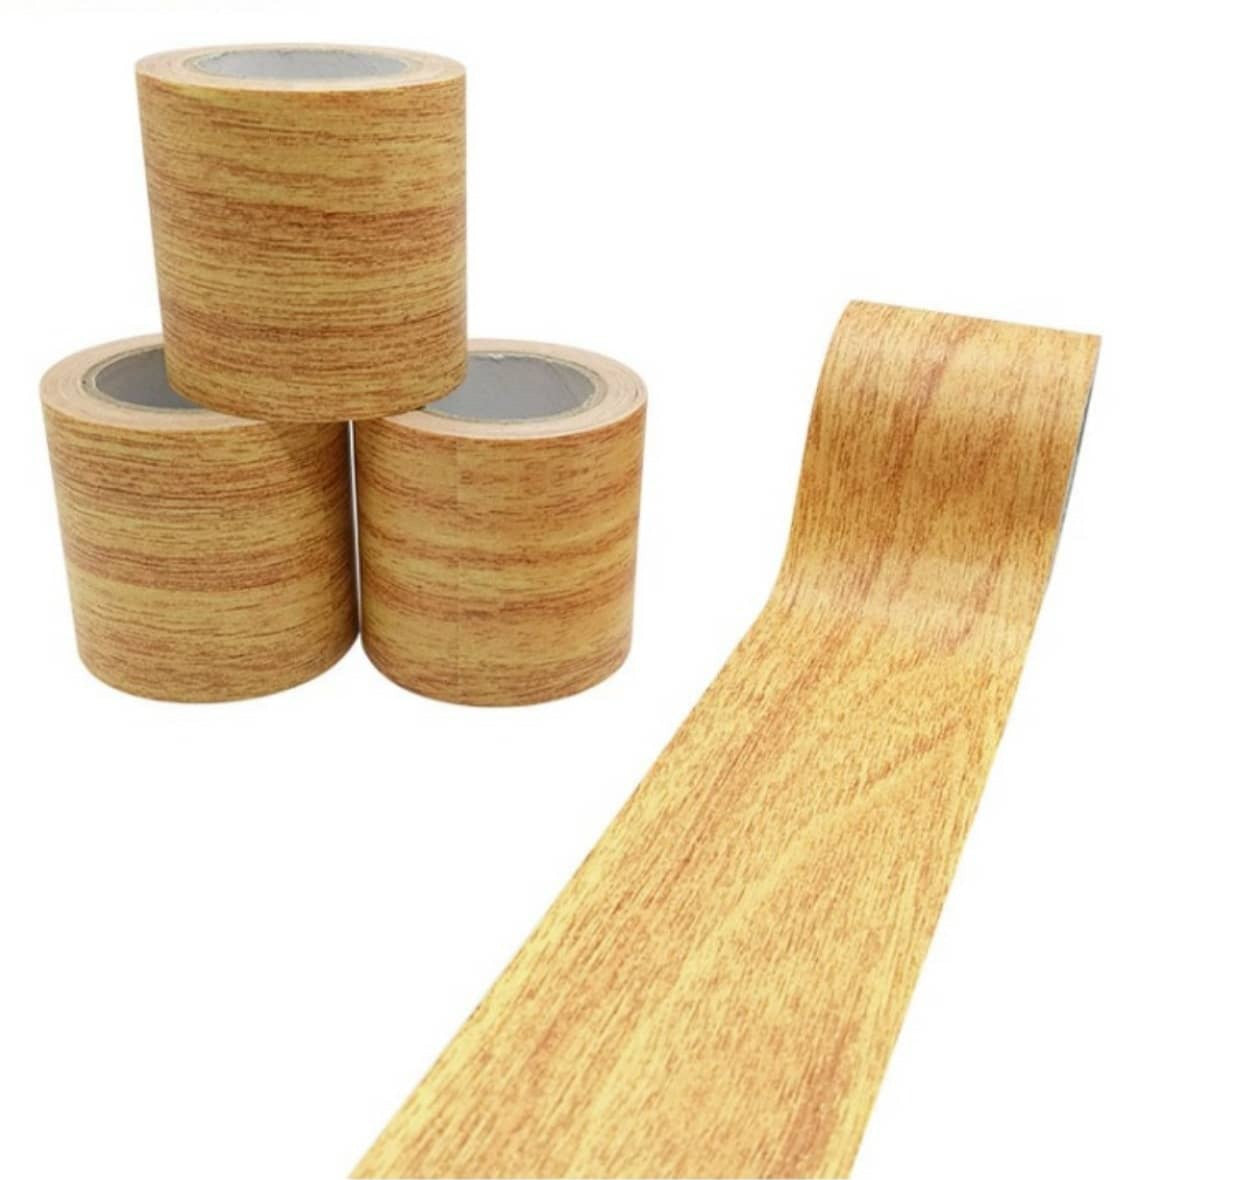 Customized Wooden Grain Tape Customized Wooden design Tape For Furniture and Floor Waterproof Repair Tape Patch Wood Textured Adhesive Tape/Baseboard Repair